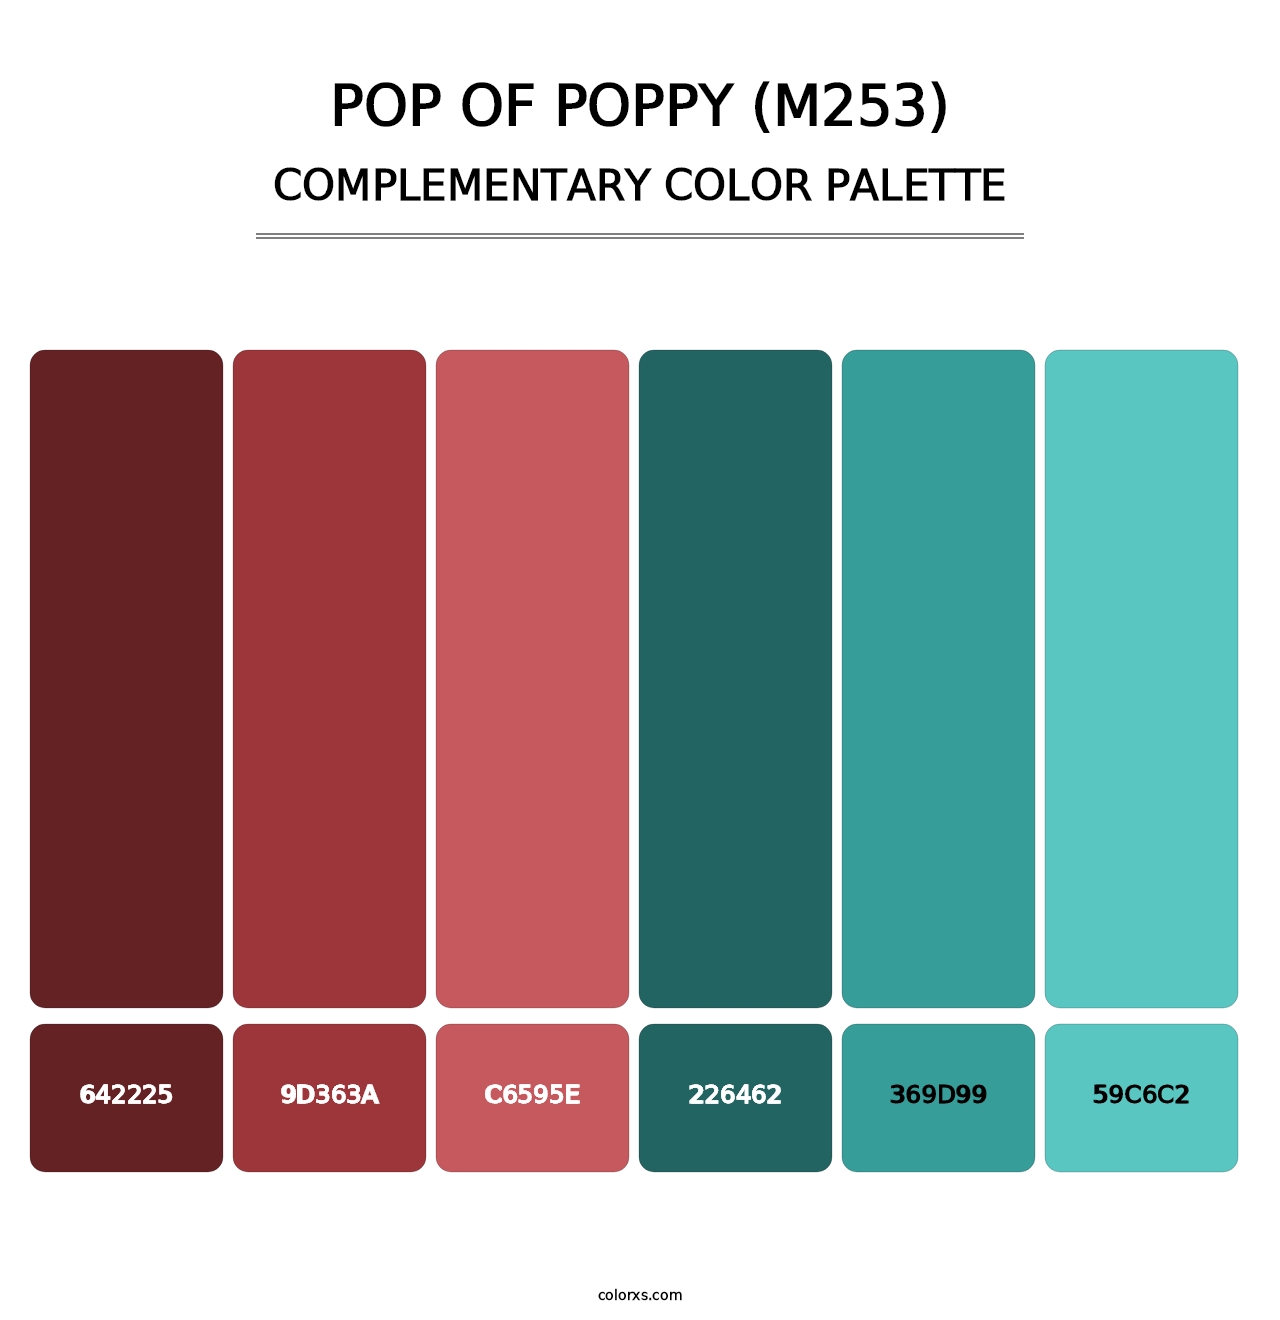 Pop of Poppy (M253) - Complementary Color Palette